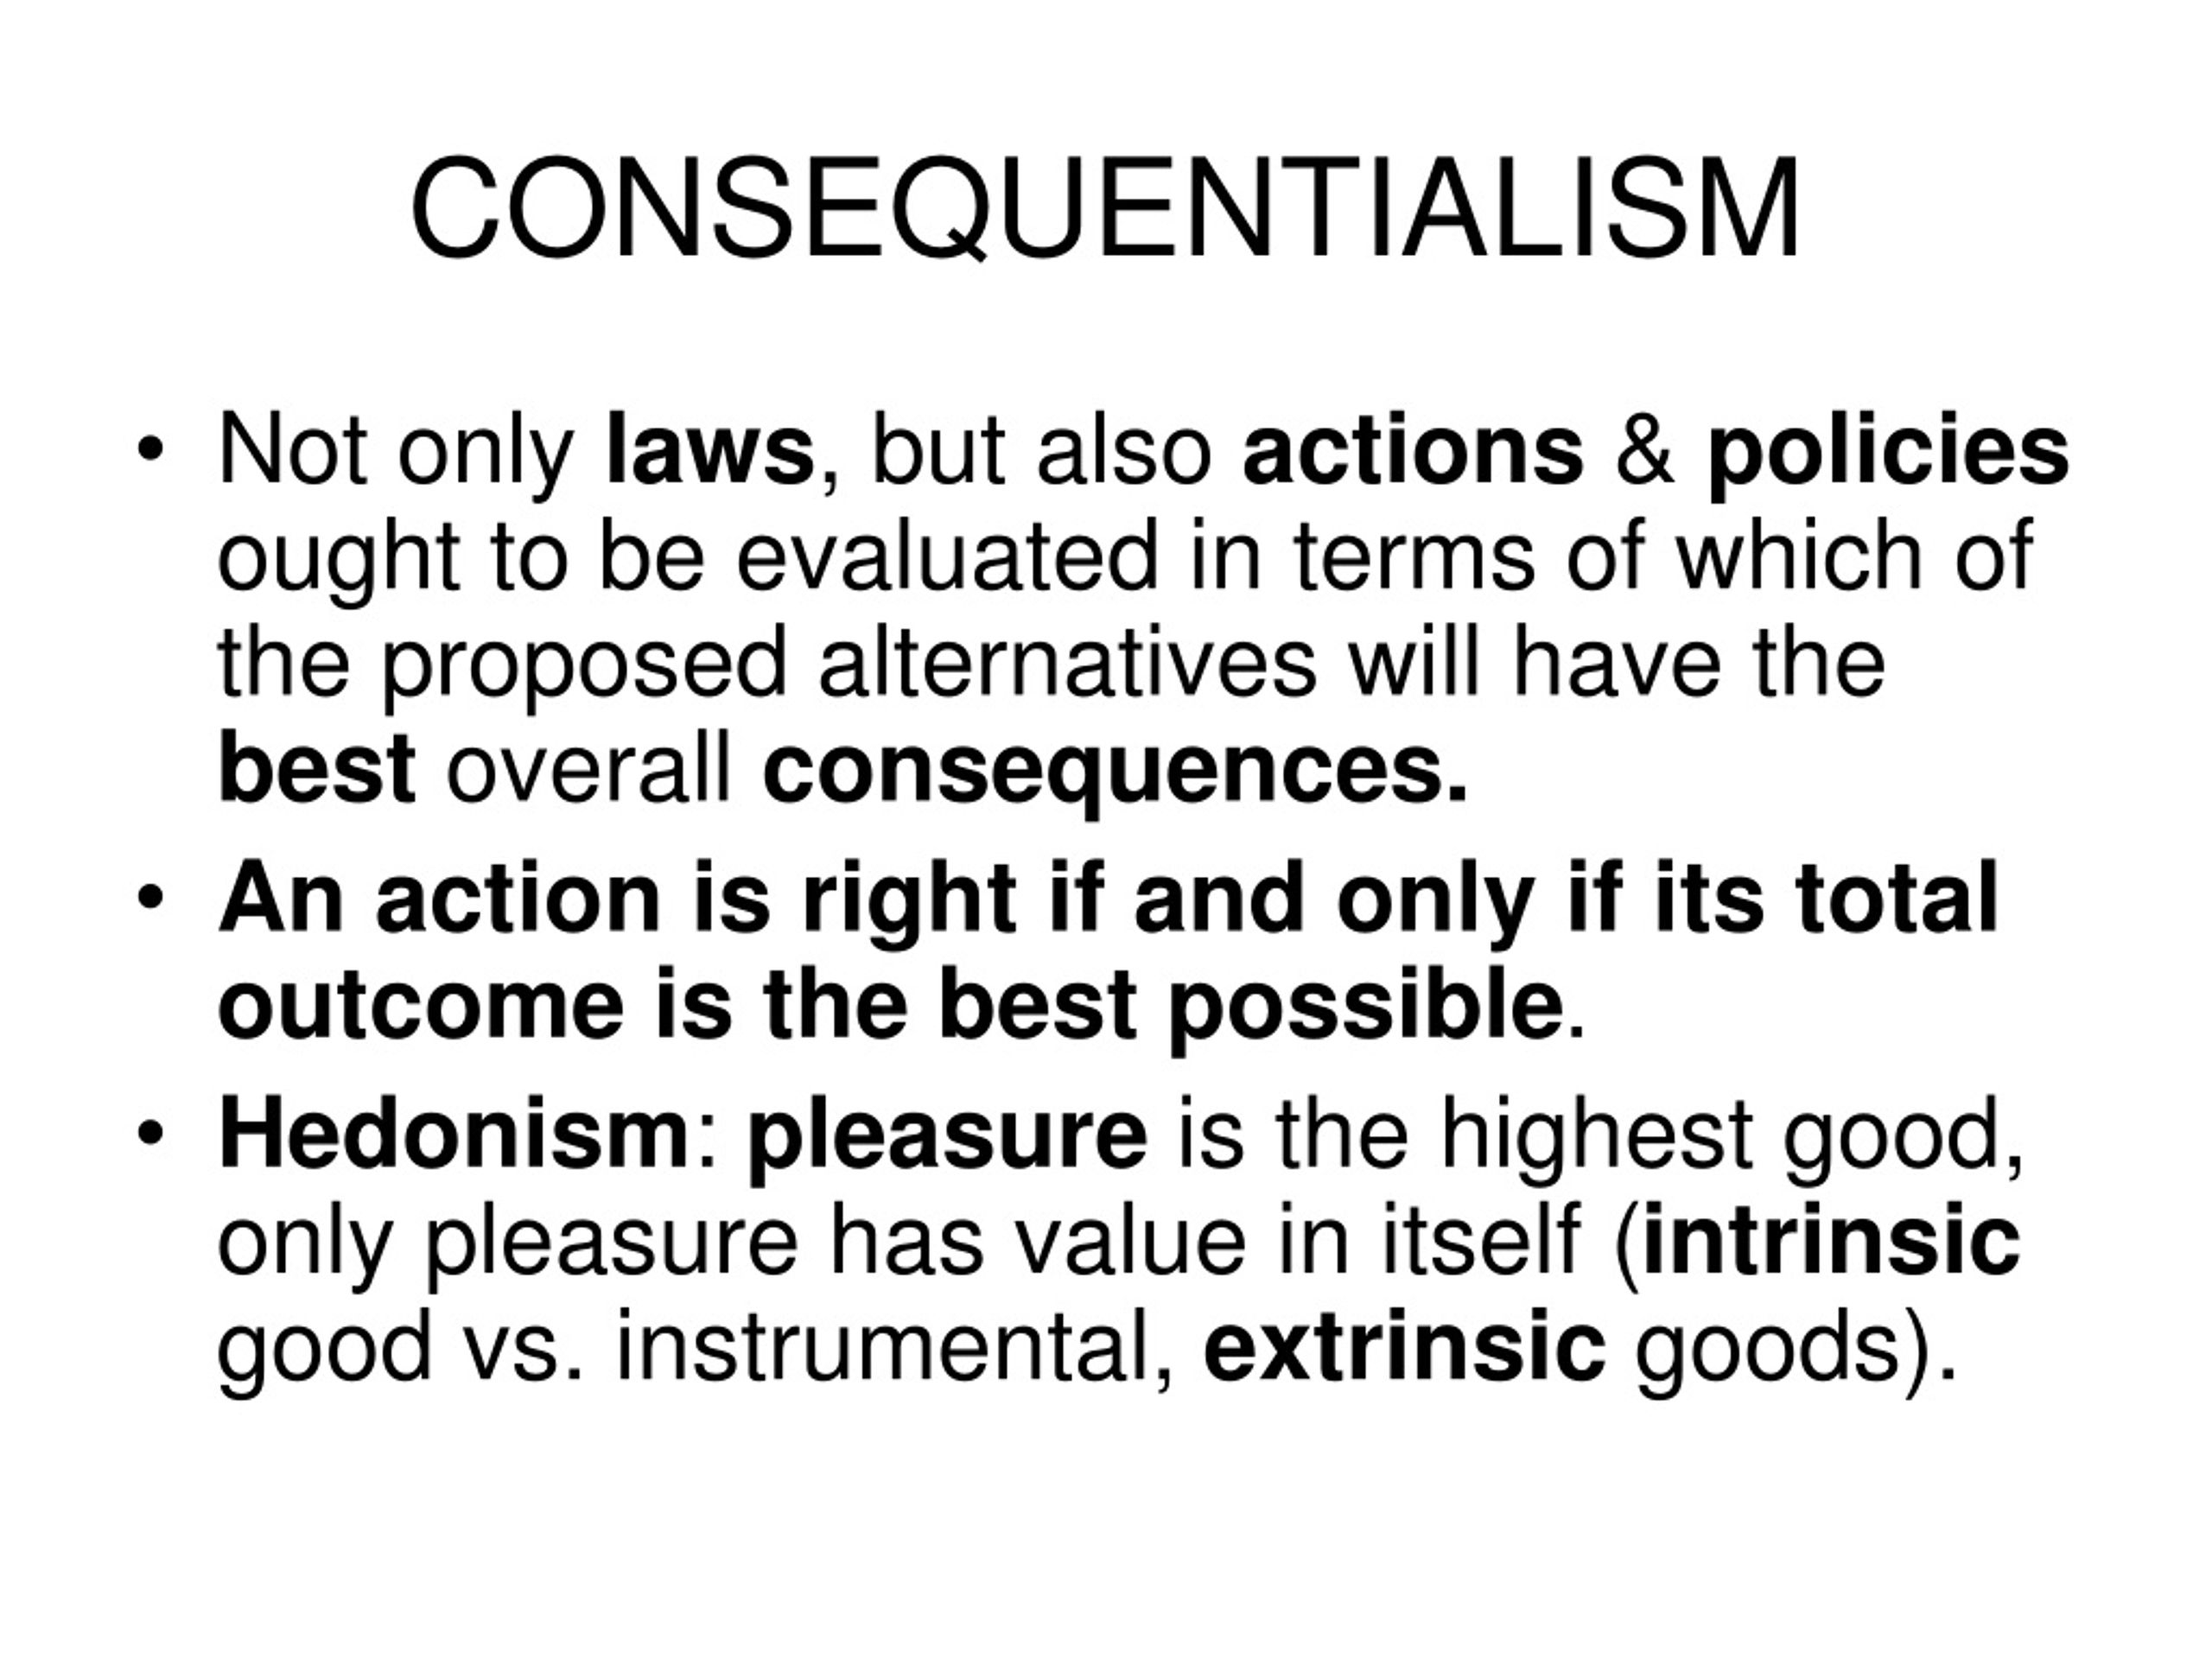 hedonic consequentialism